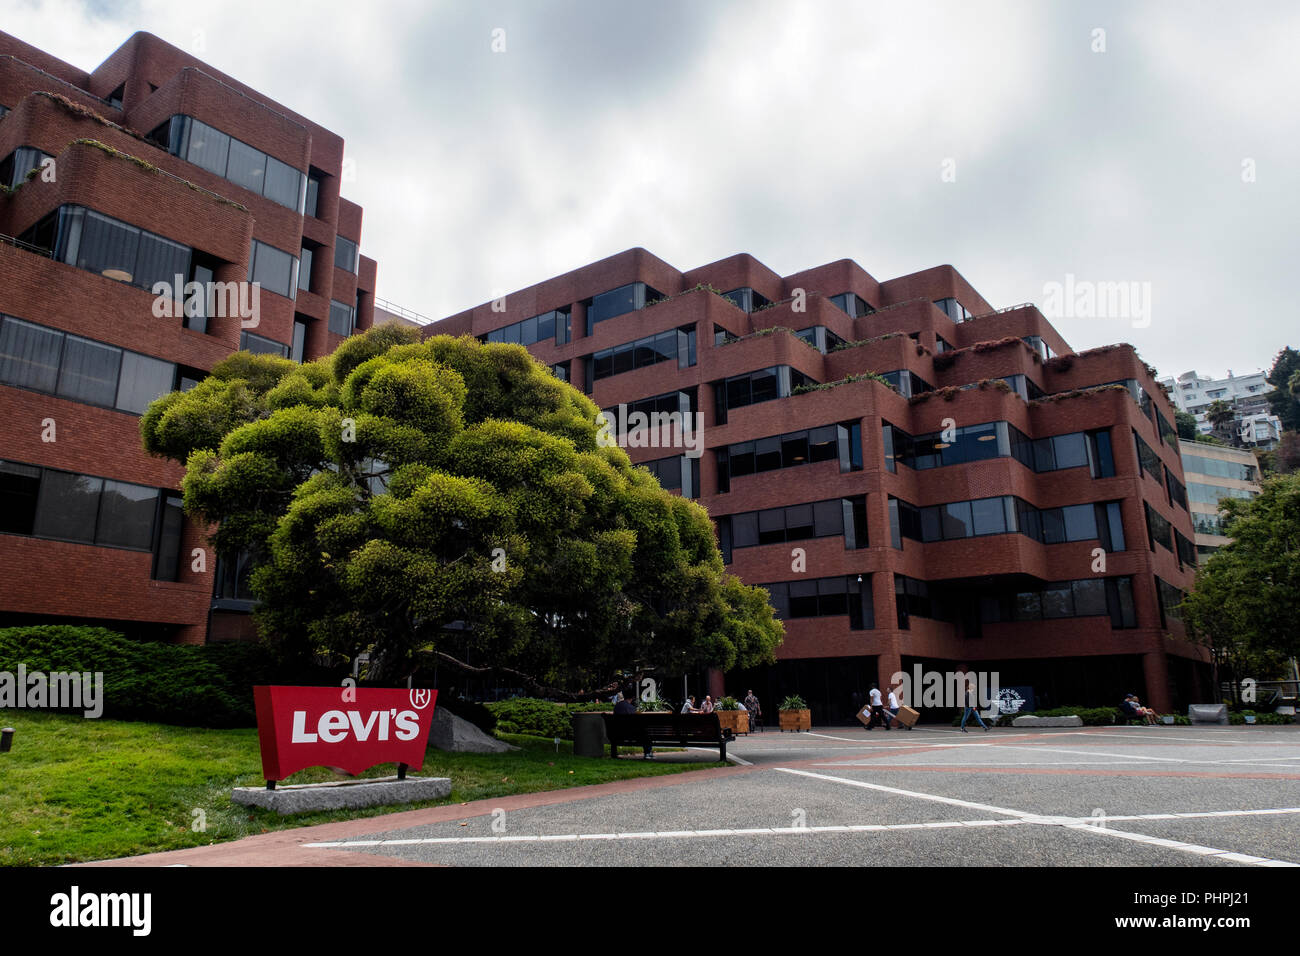 Strauss and Co global headquarters at Levi's San Francisco Stock Photo - Alamy